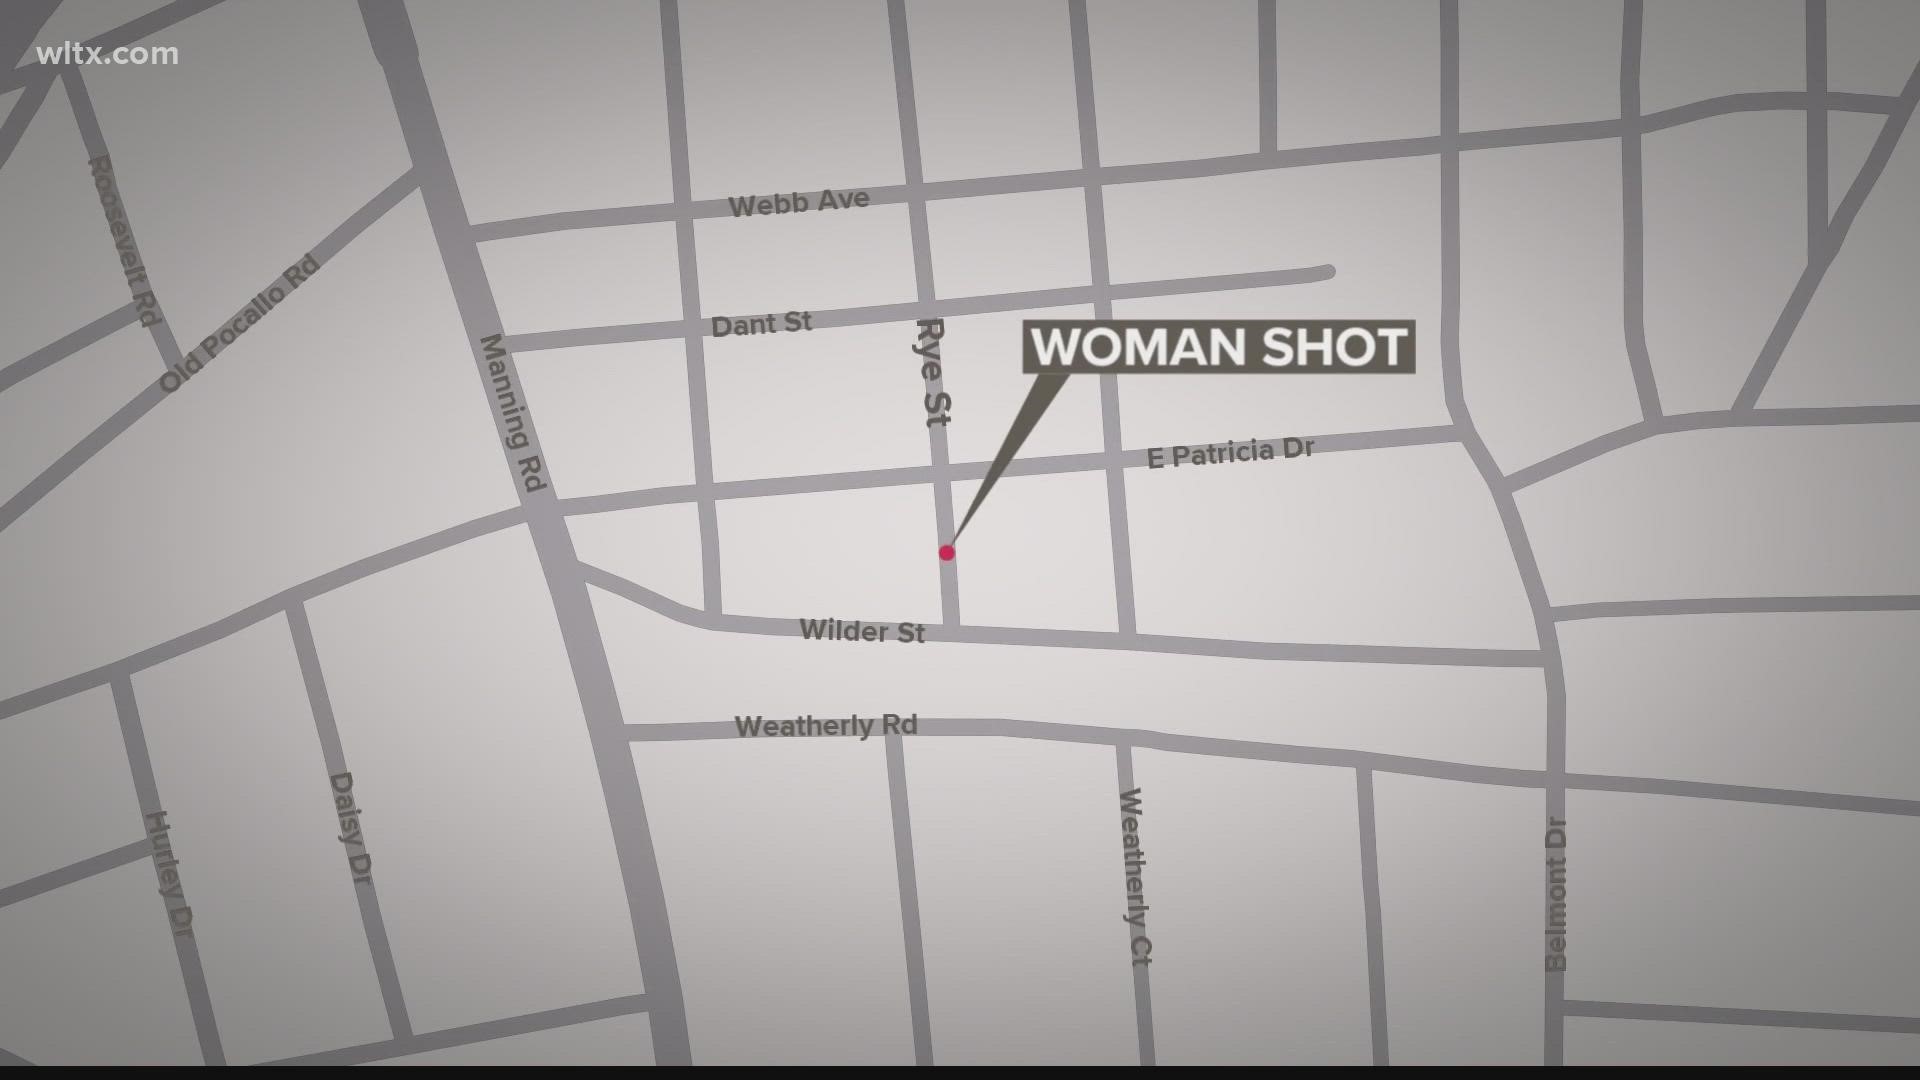 Sumter County deputies say the woman was walking along Rye Street with her baby in a stroller when she was shot multiple times.